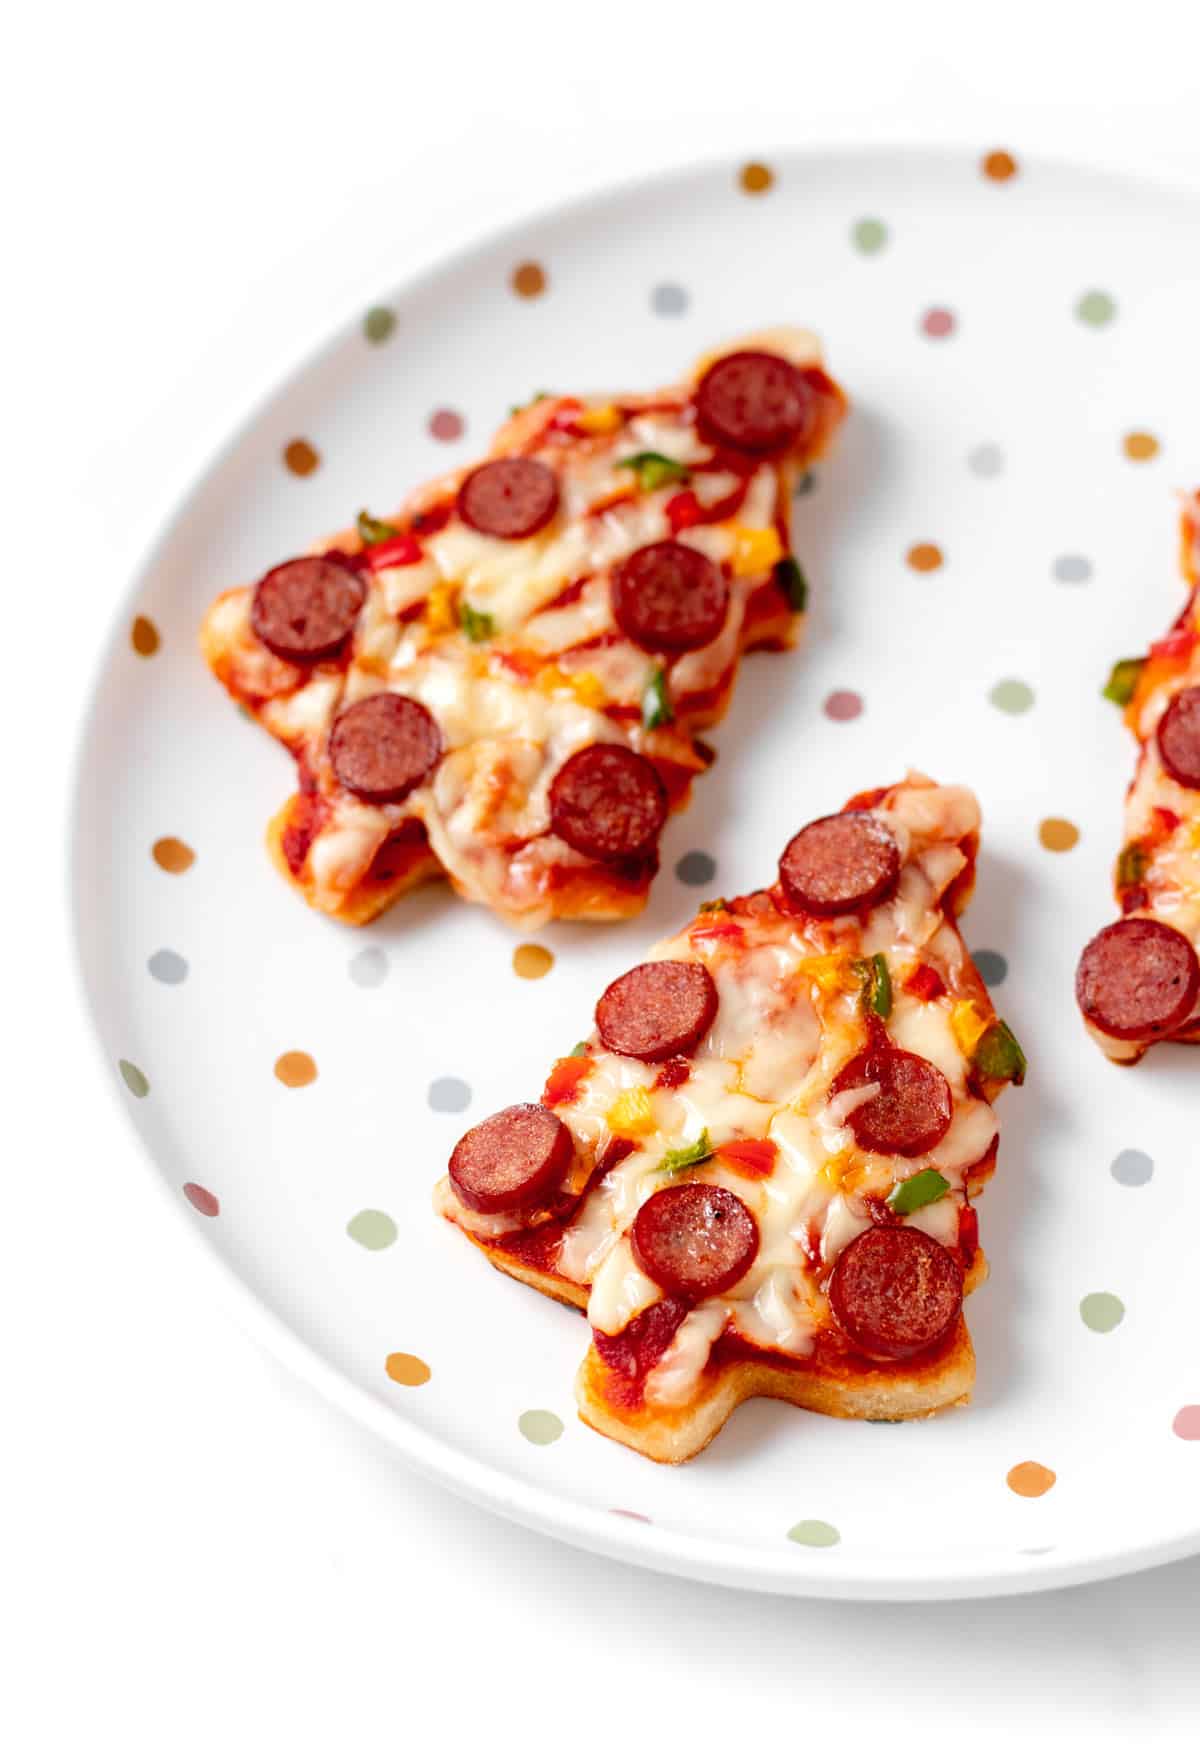 Mini Christmas tree pizzas after they have baked in the oven on a decorative plate.